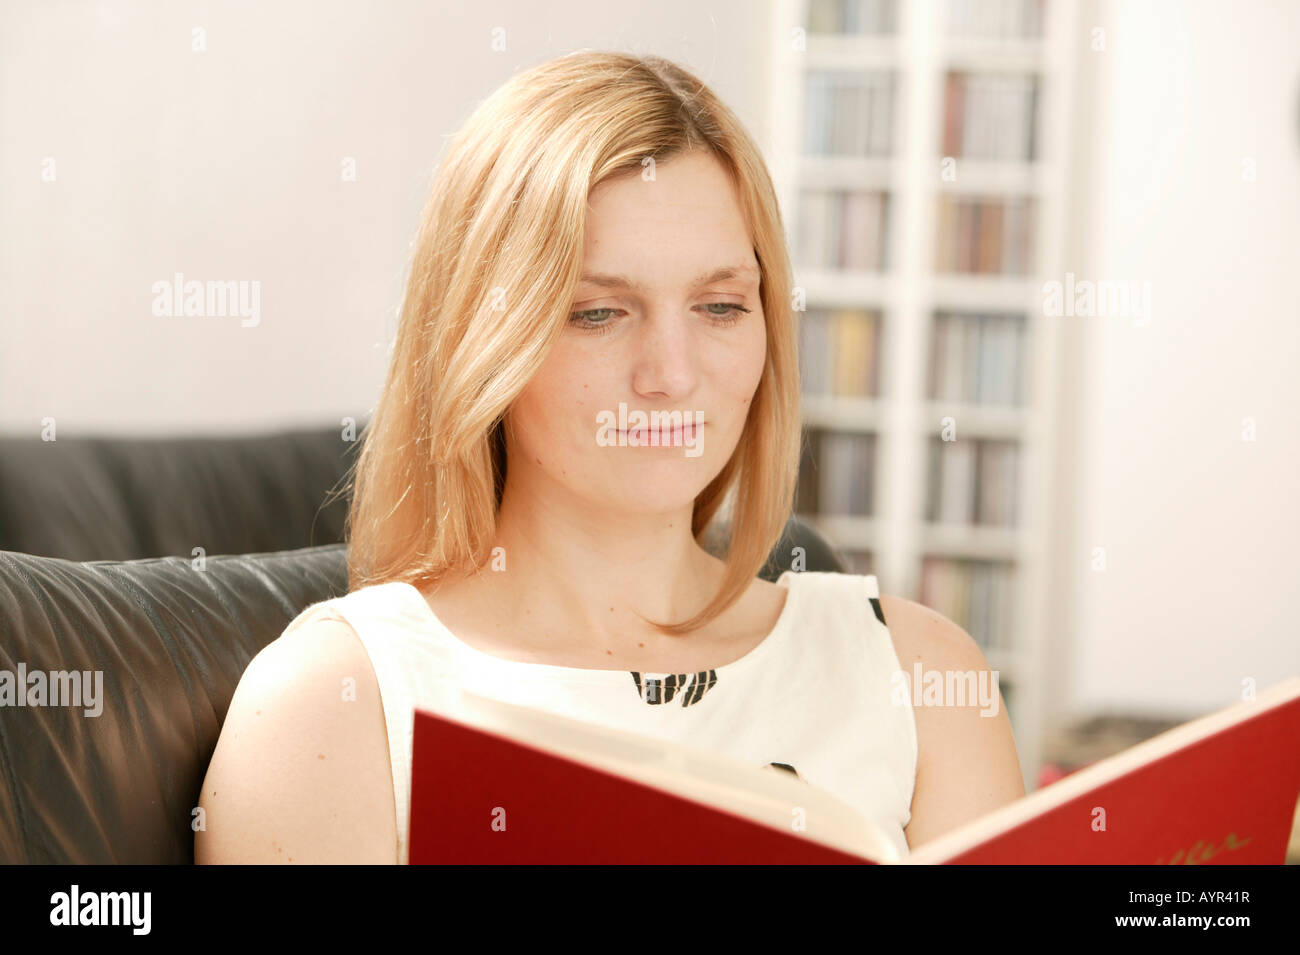 Young blonde woman reading red book Stock Photo